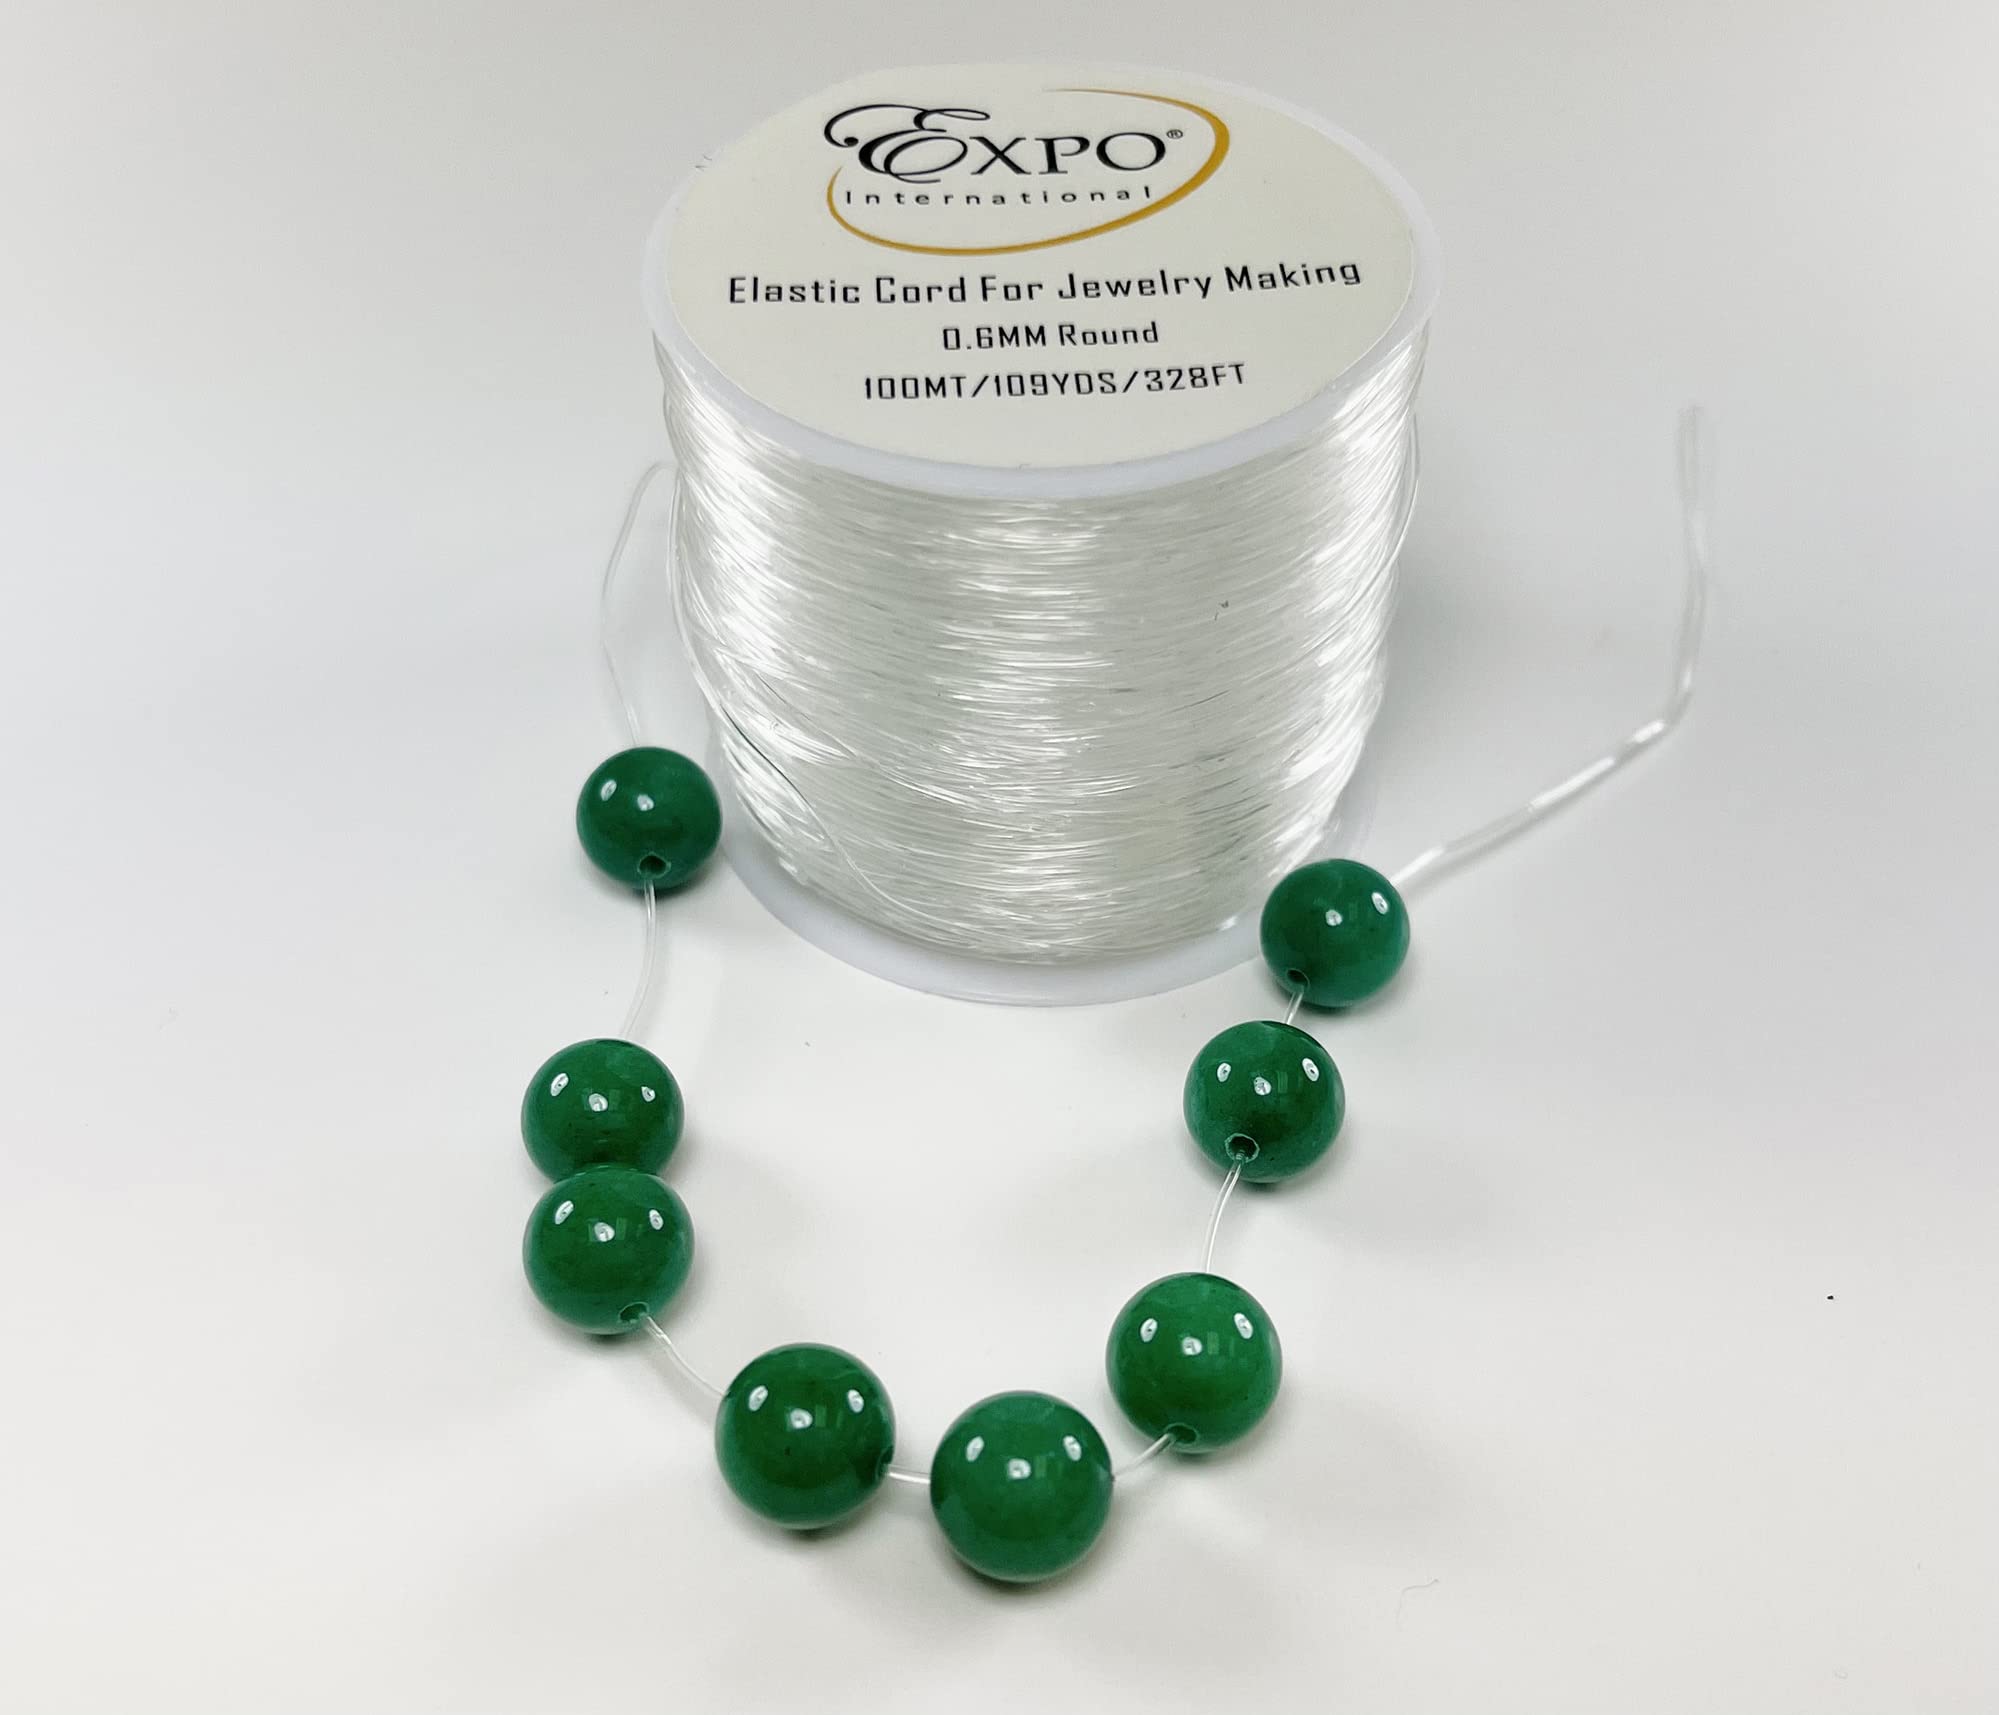 Expo International Elastic String Cord, 0.6 mm Wide Premium Stretchy String Cord for Jewelry Making, Thin Bracelet Cord, Versatile Jewelry Cord, Roll/Spool of 100 Meters, Clear